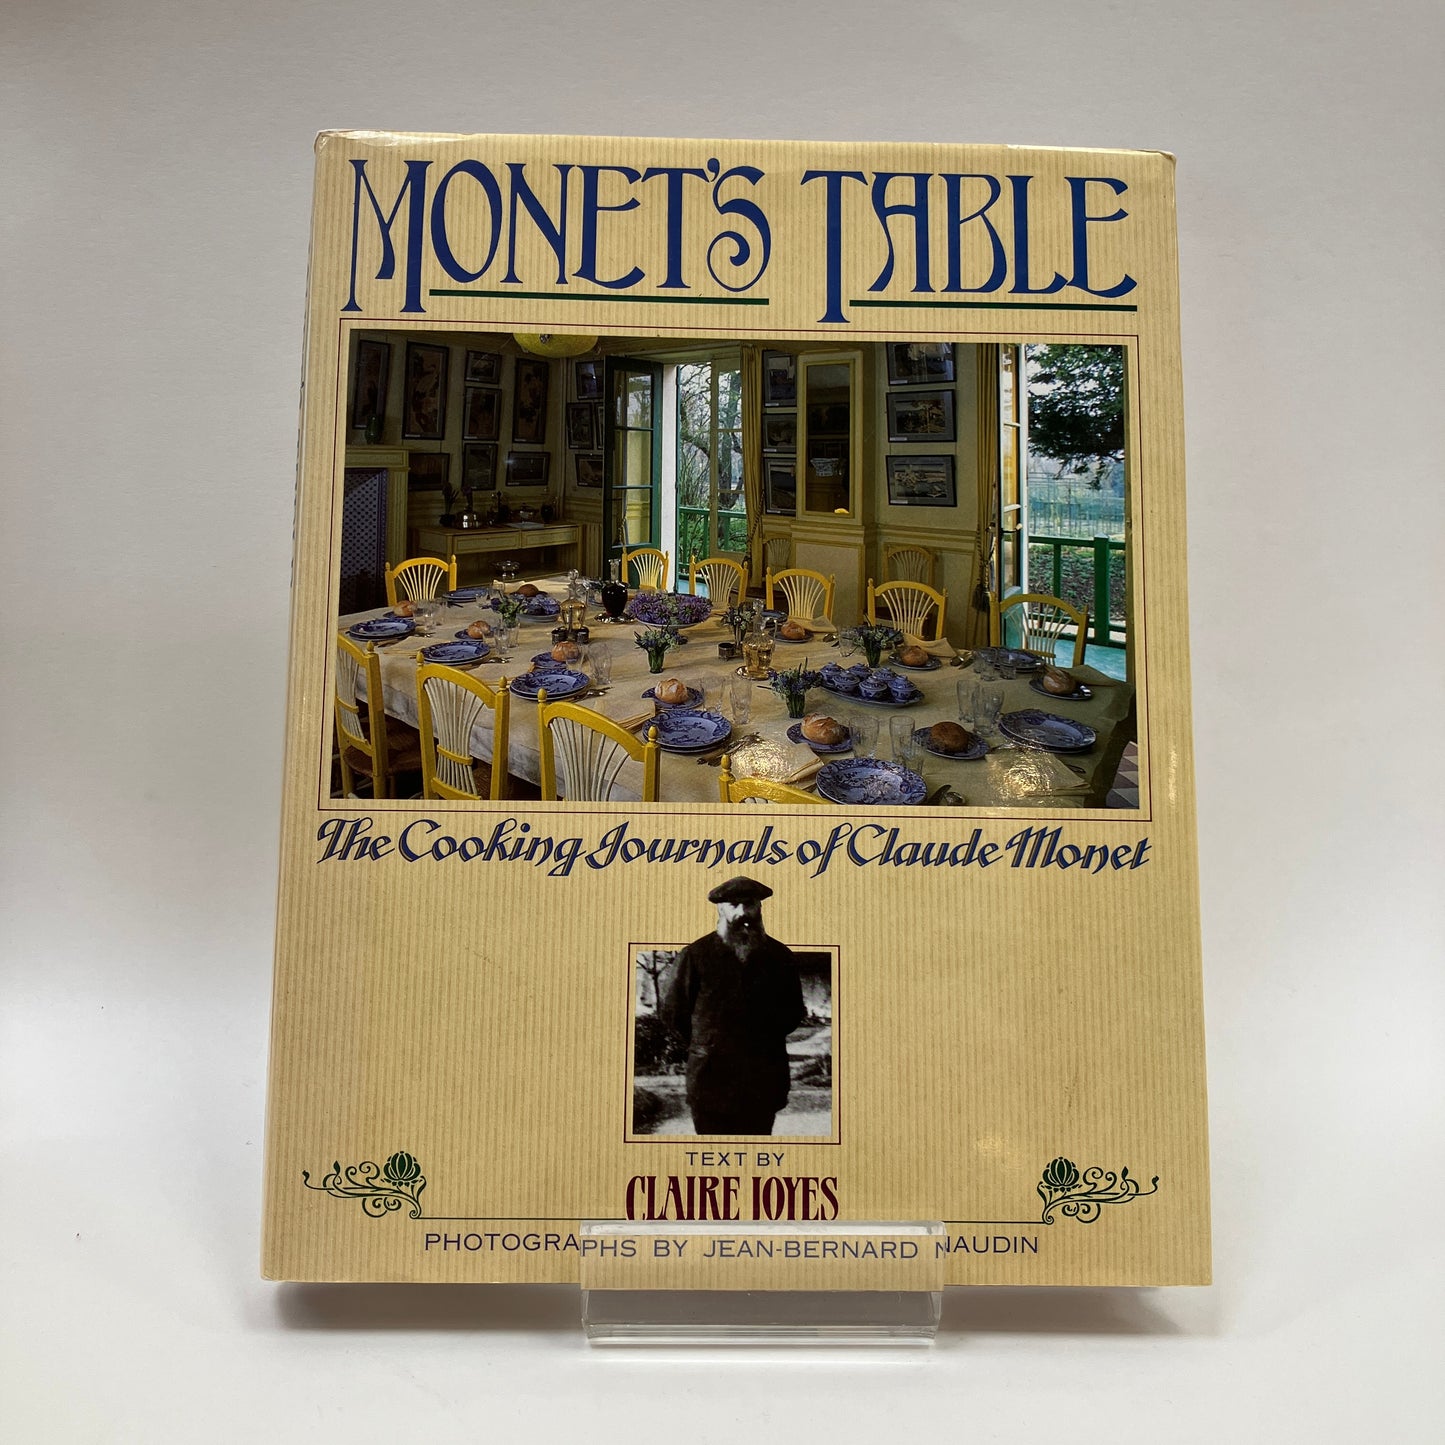 Monet's Table, The Cooking Journals of Claude Monet, First Edition, Claire Joyes, Simon and Schuster, 1989, Hardcover